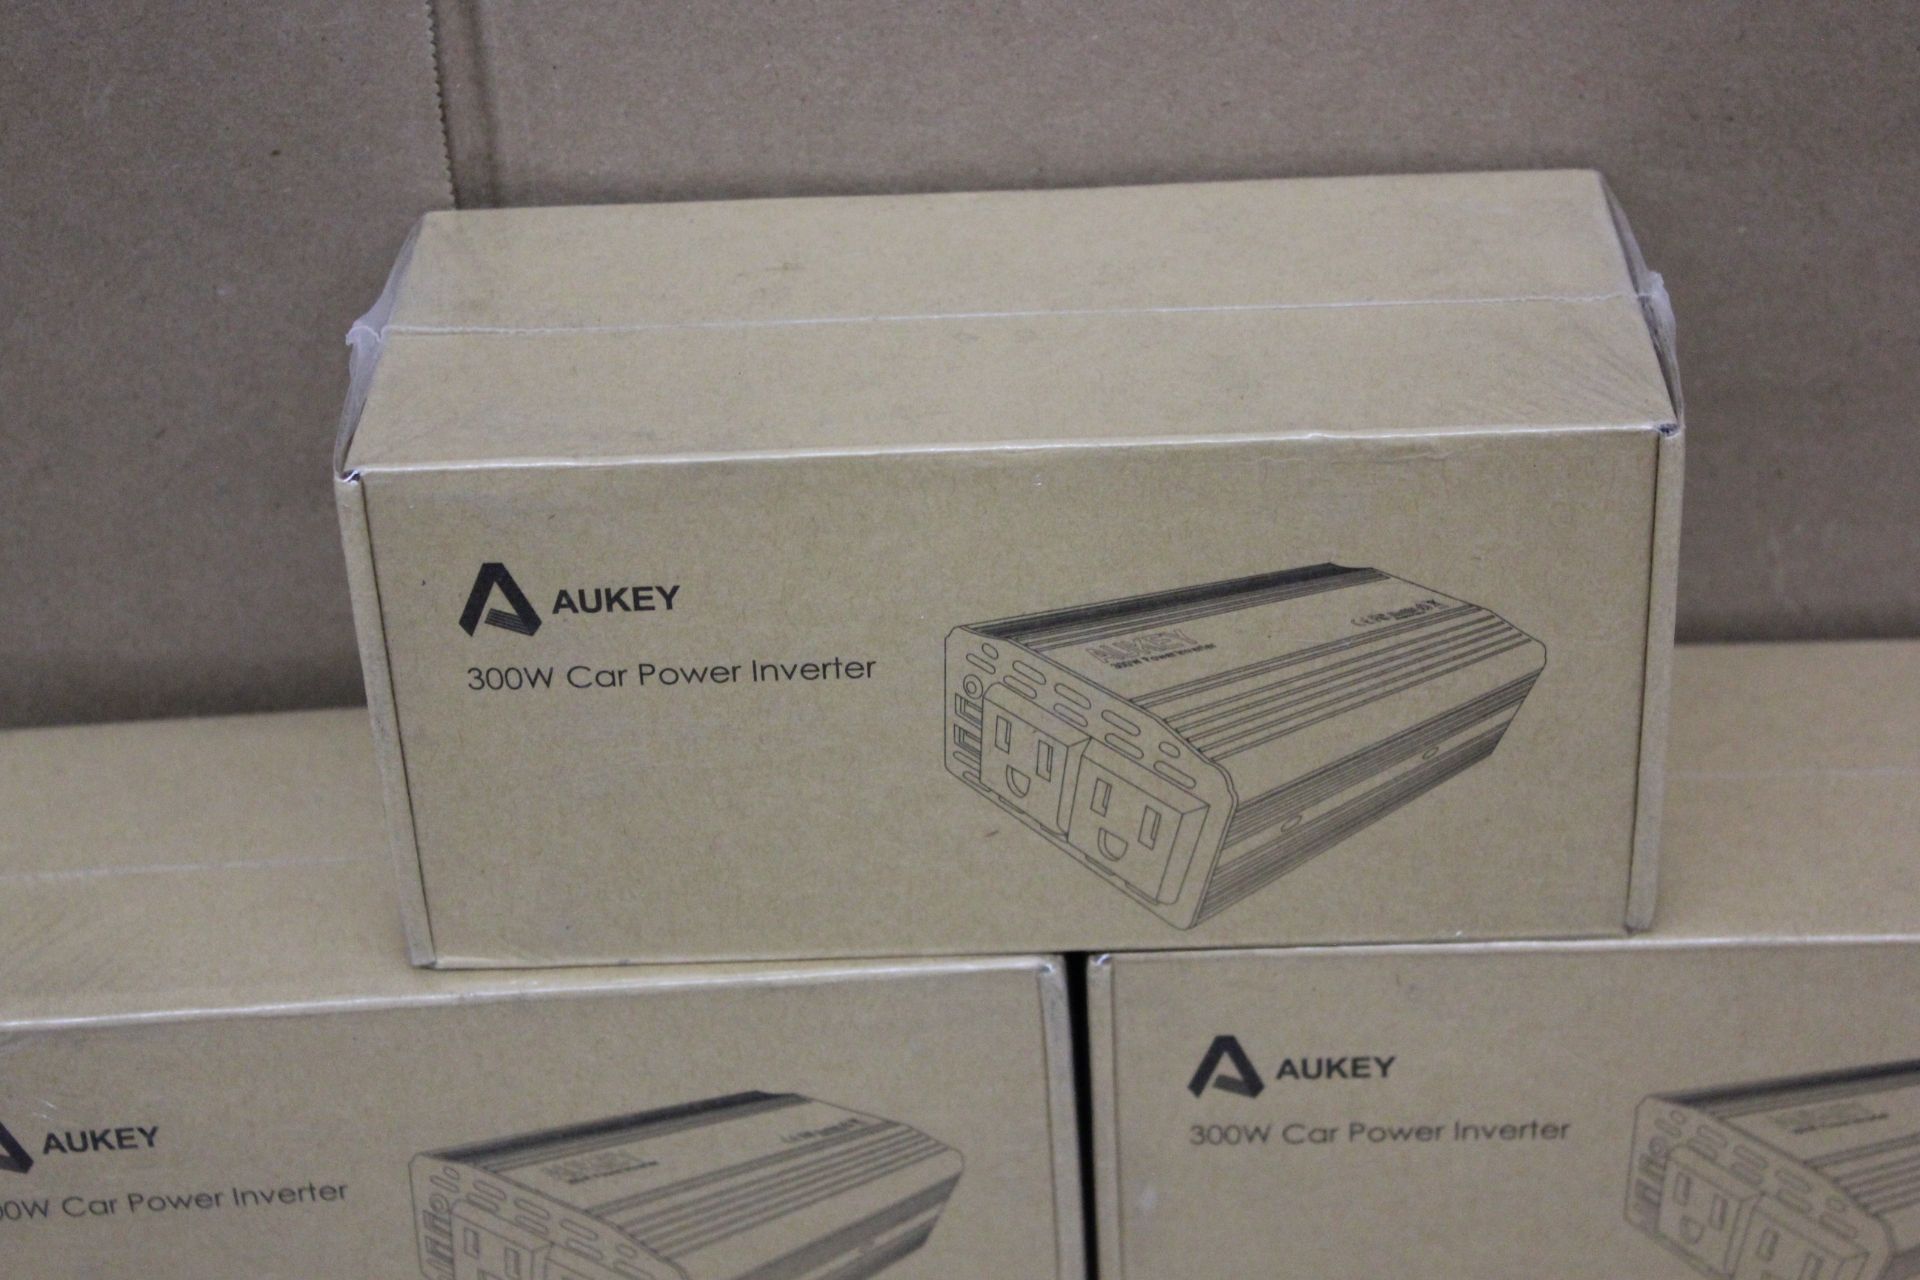 LOT OF NEW AUKEY 300W CAR POWER INVERTERS - Image 2 of 5